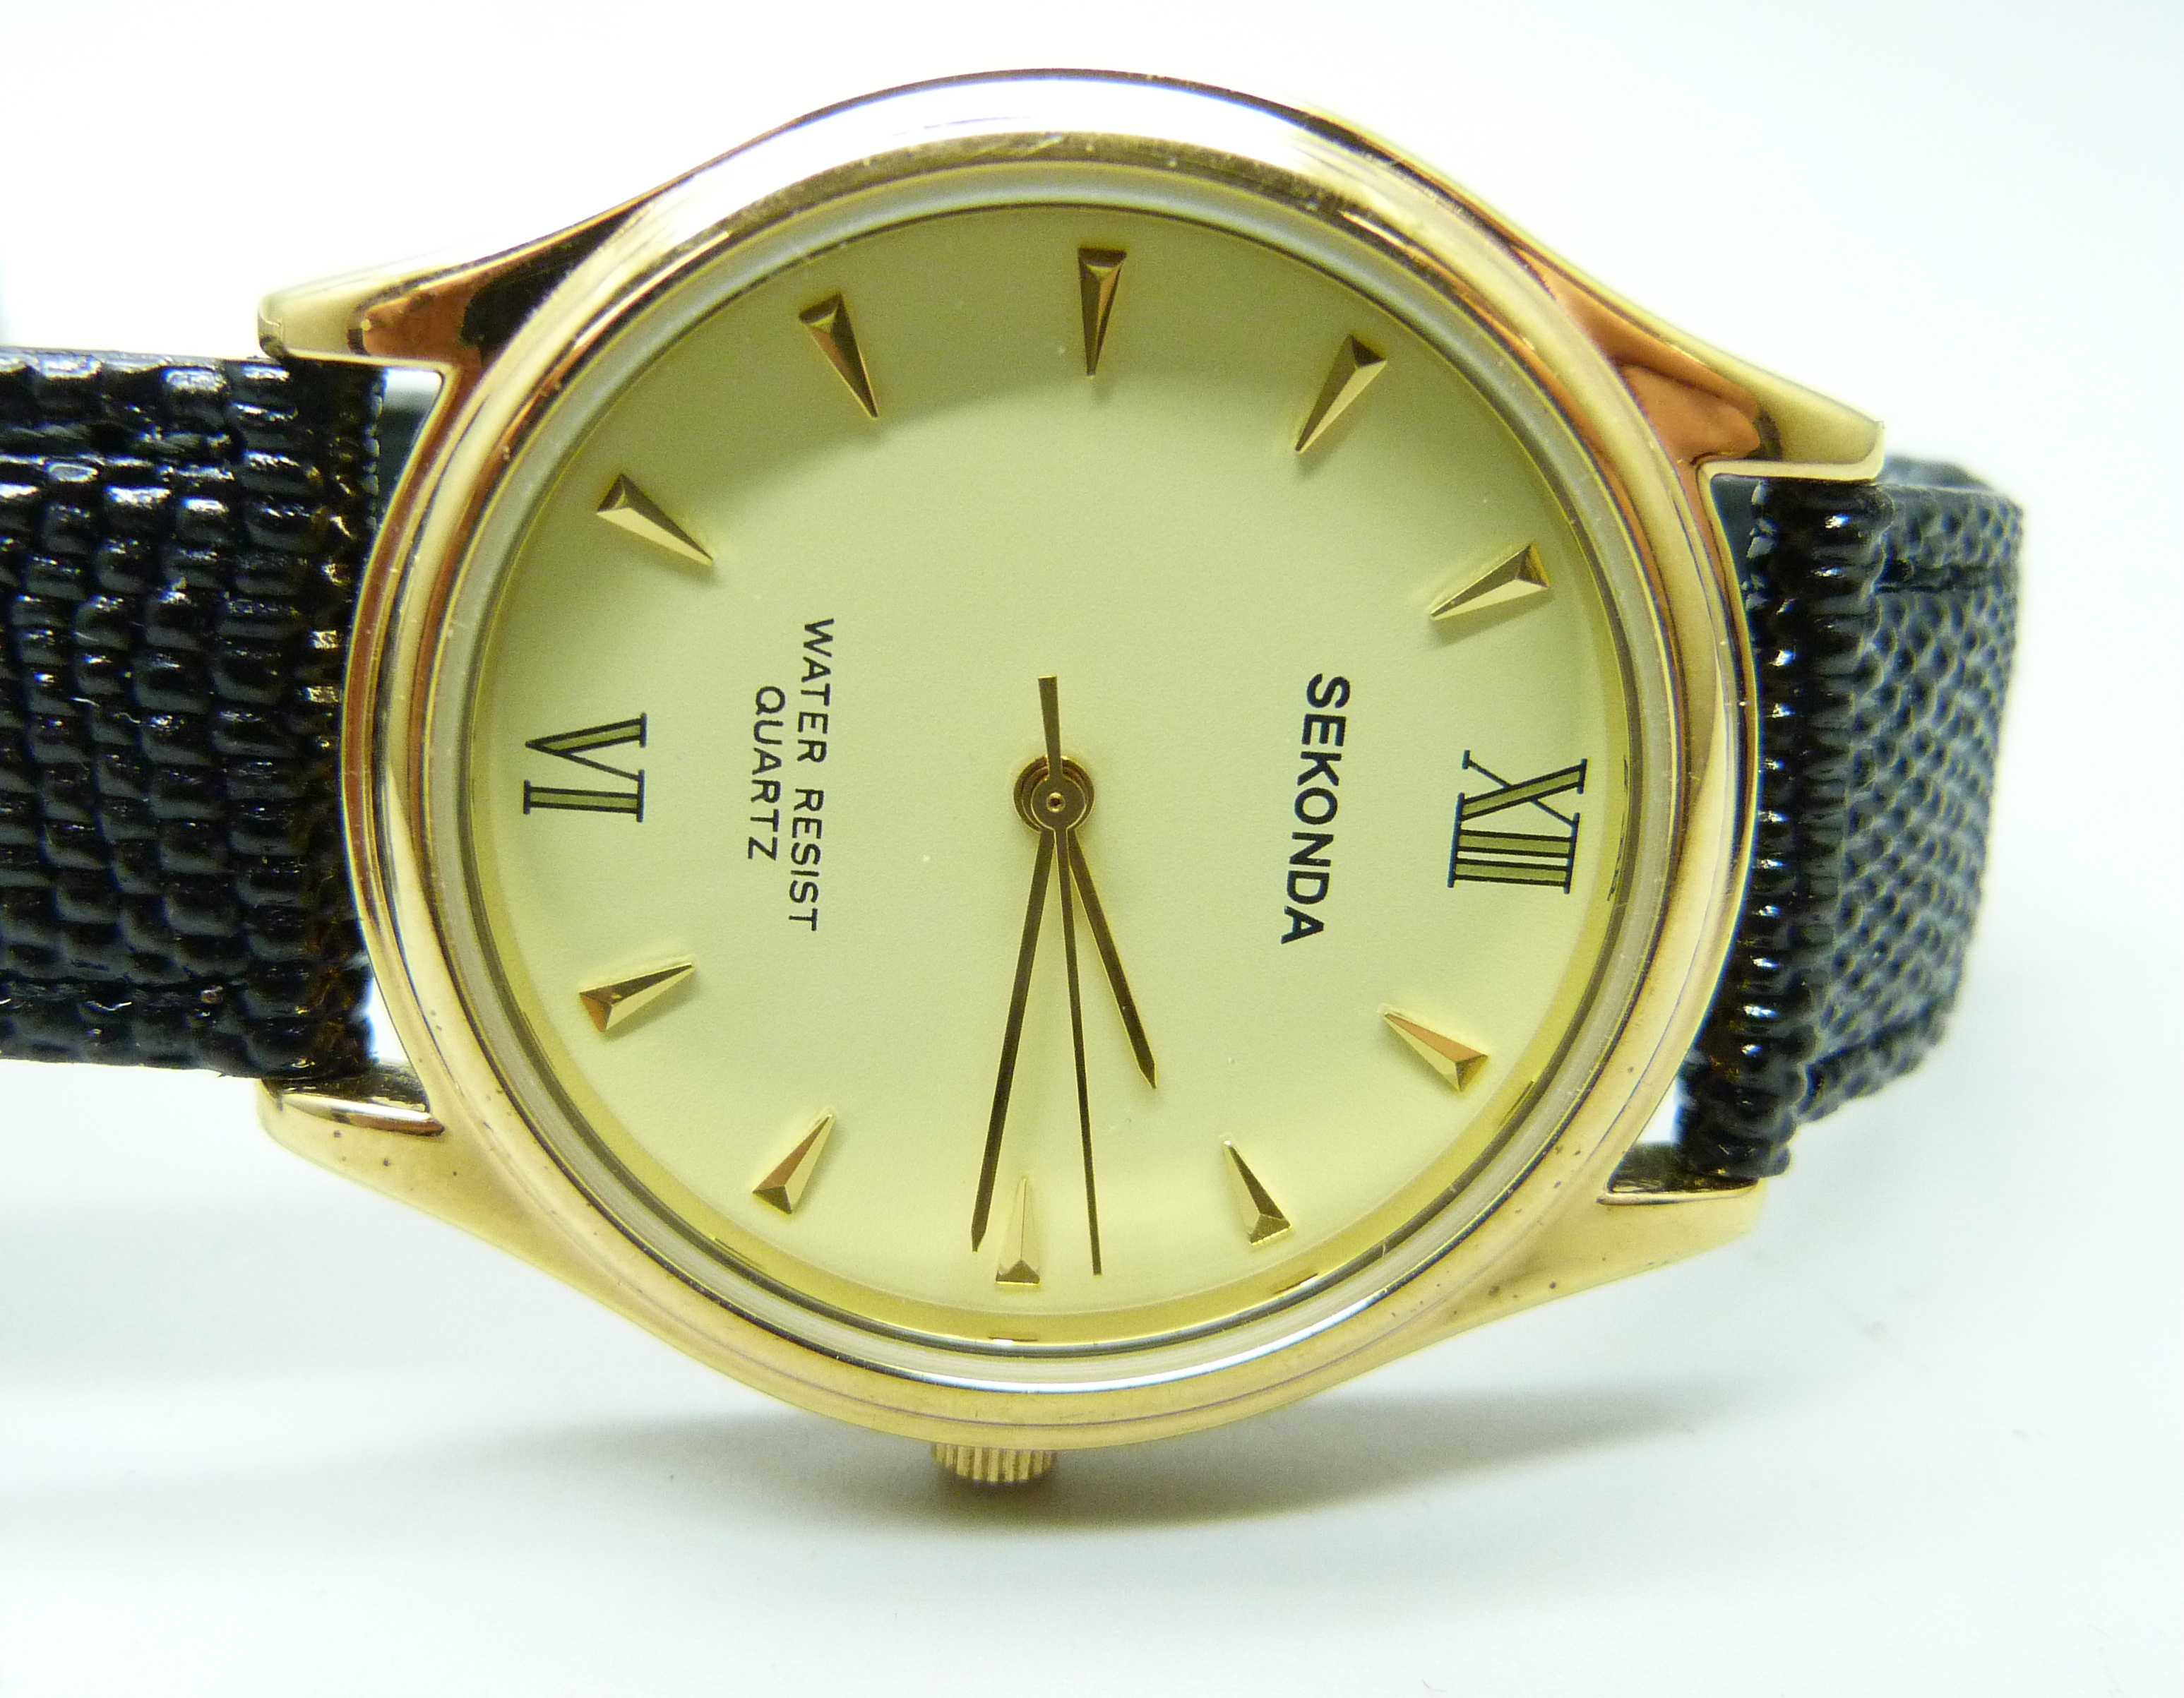 Two wristwatches, Barbour and Sekonda - Image 3 of 3